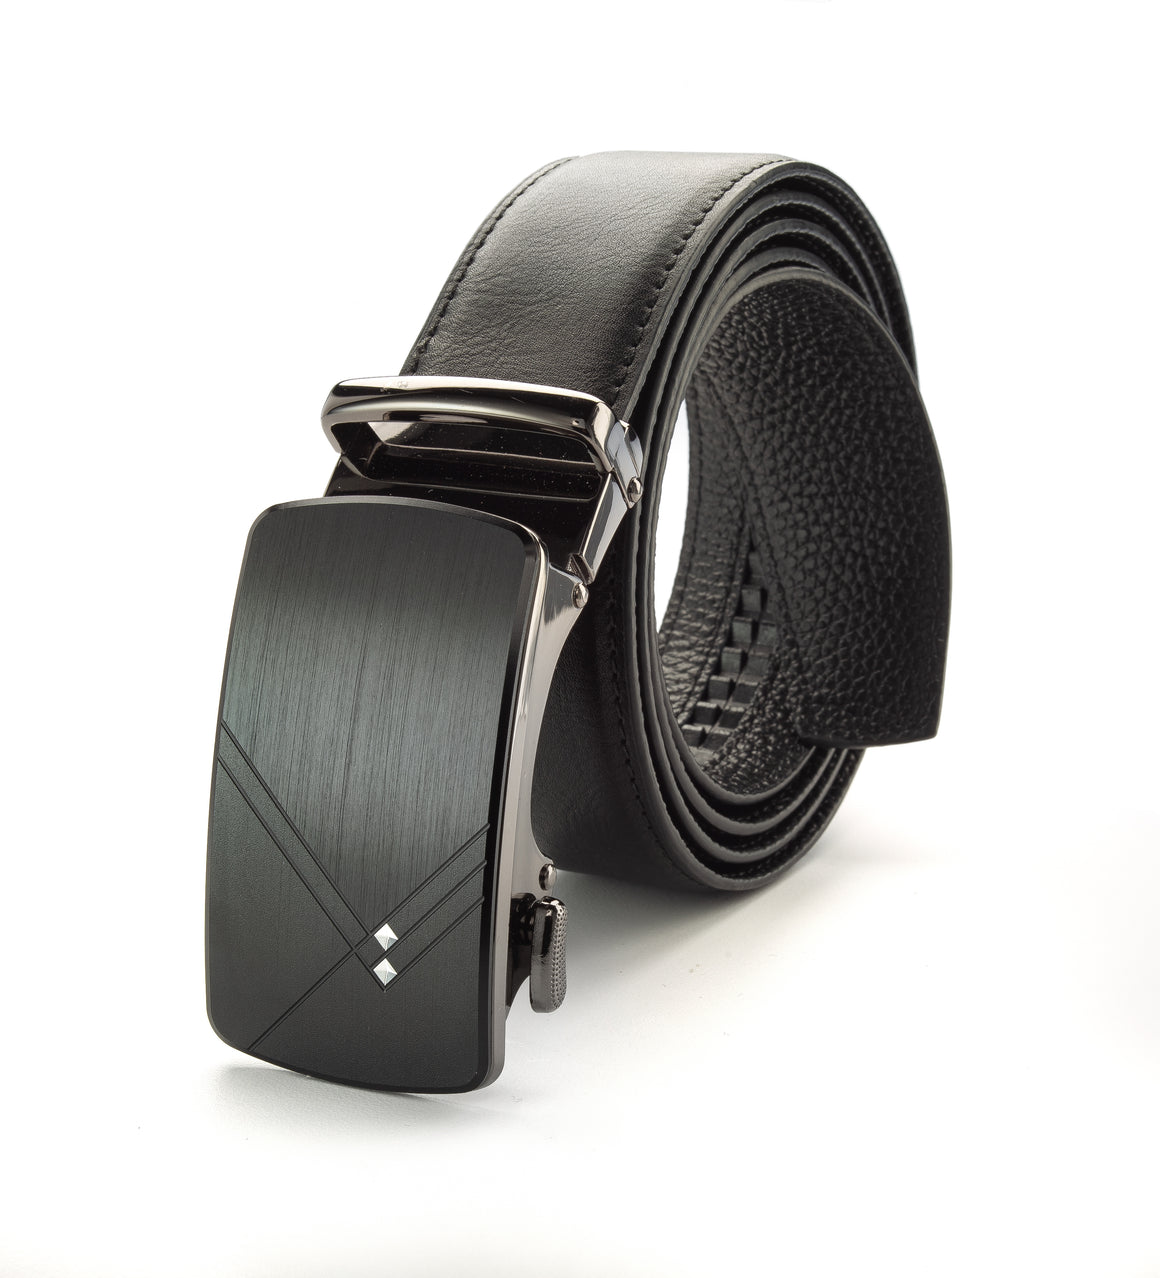 Timeless class with Royal Men's leather track belts, perfect for formal and casual | BELT-55